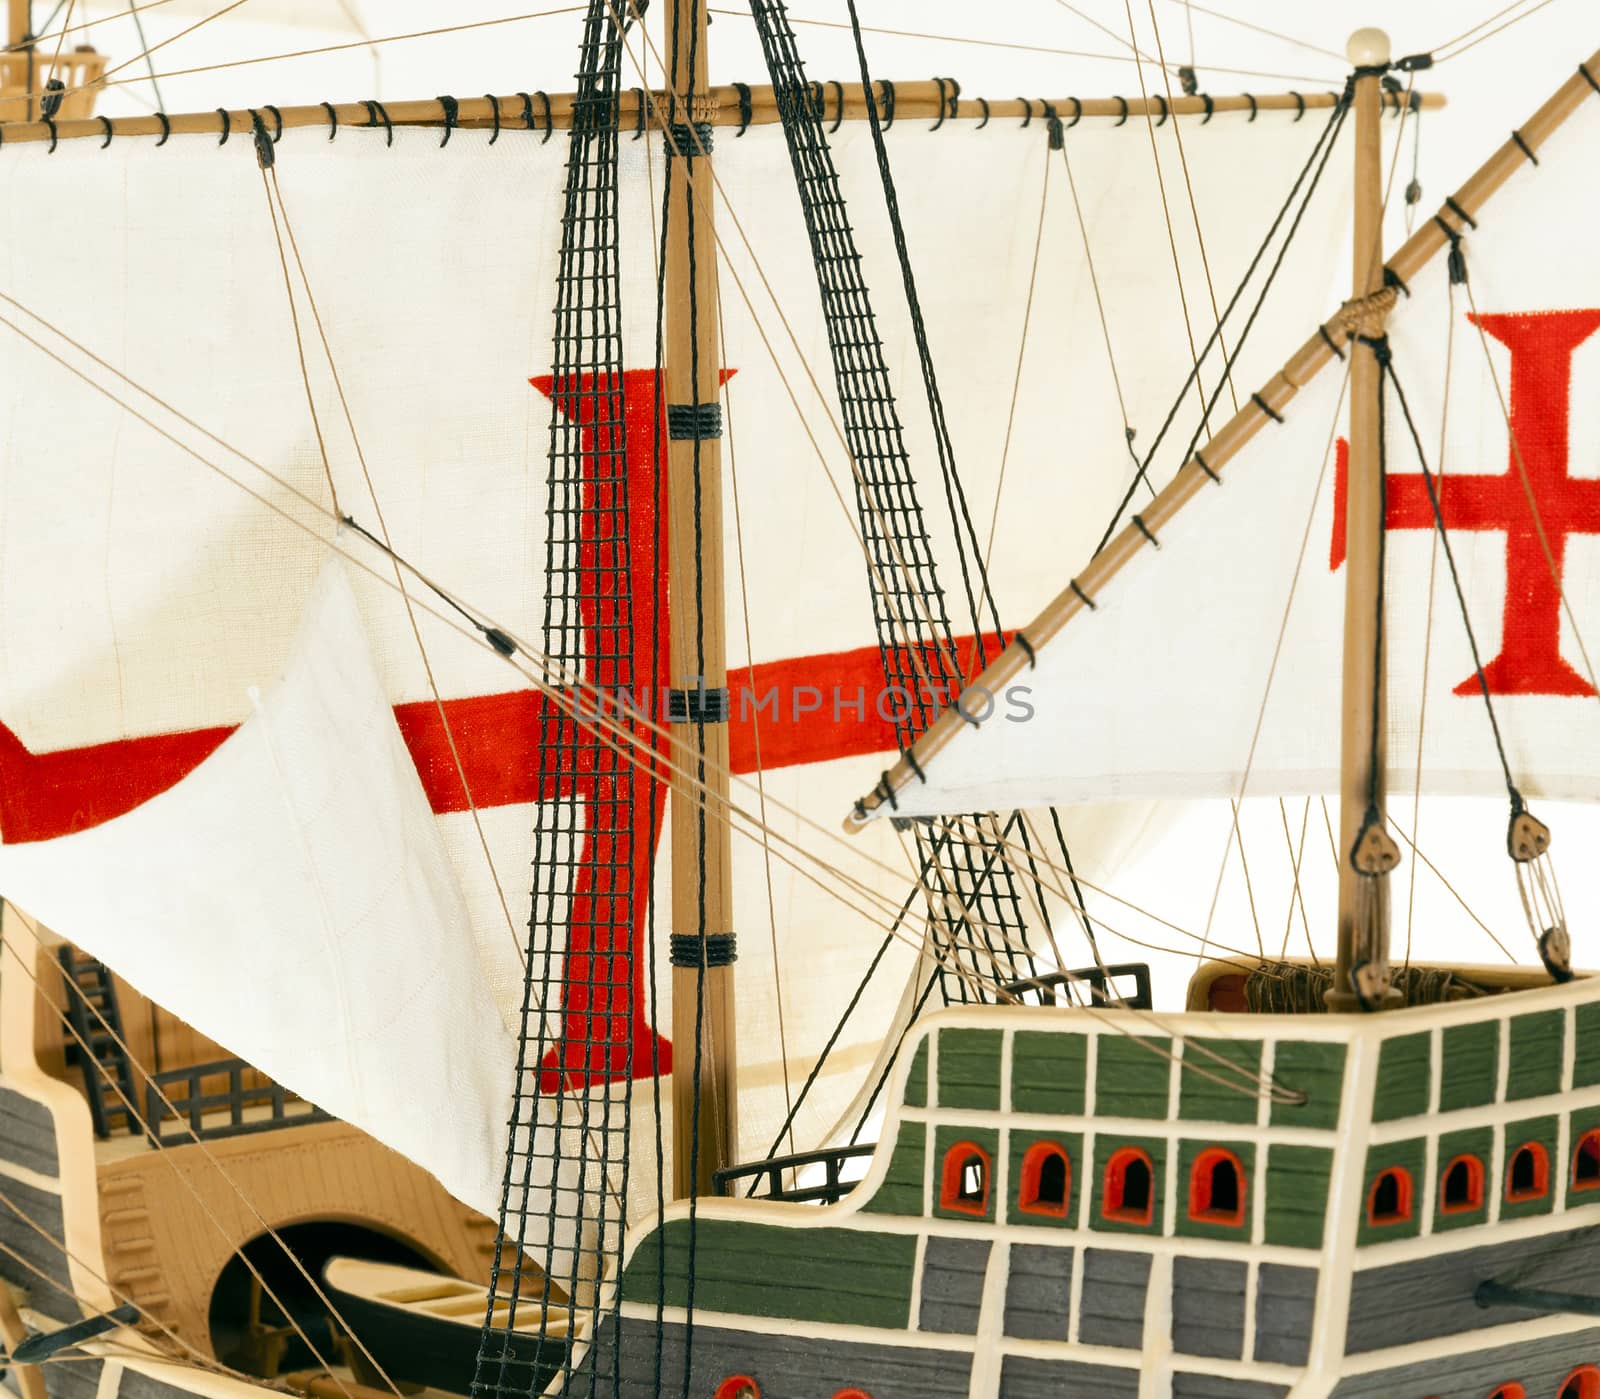   part of the photographed model sailing ship, old ship with sails